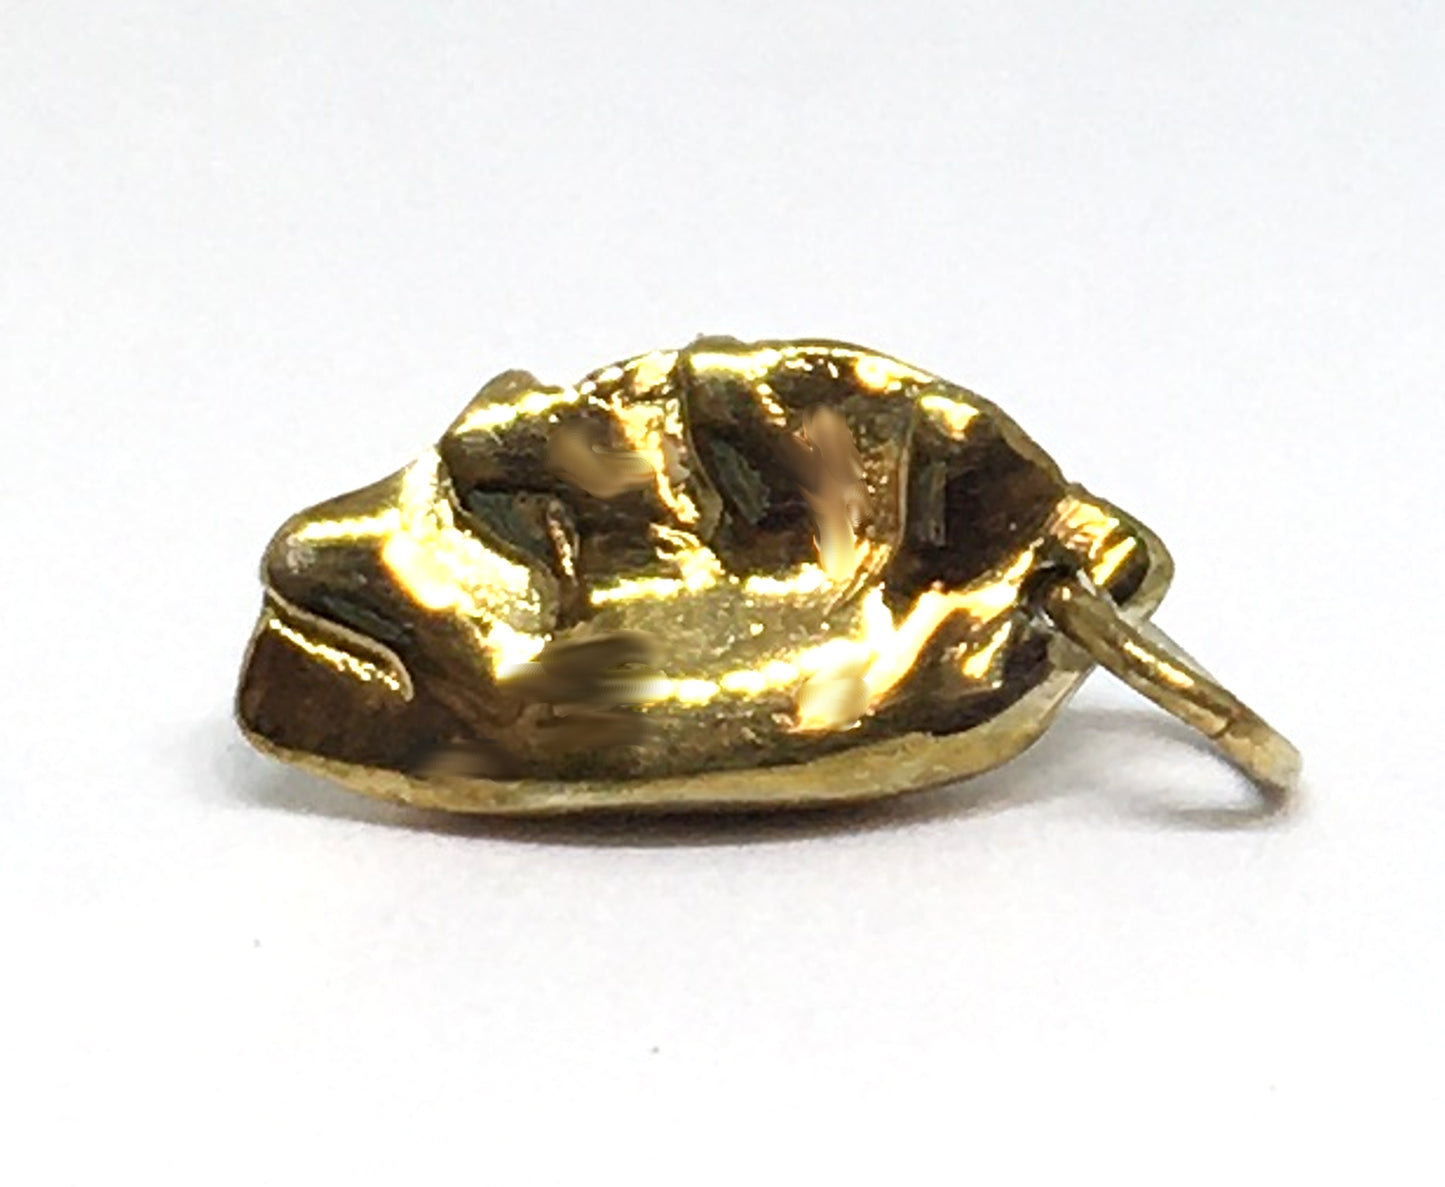 Gold Plated Chinese Dumpling Charm